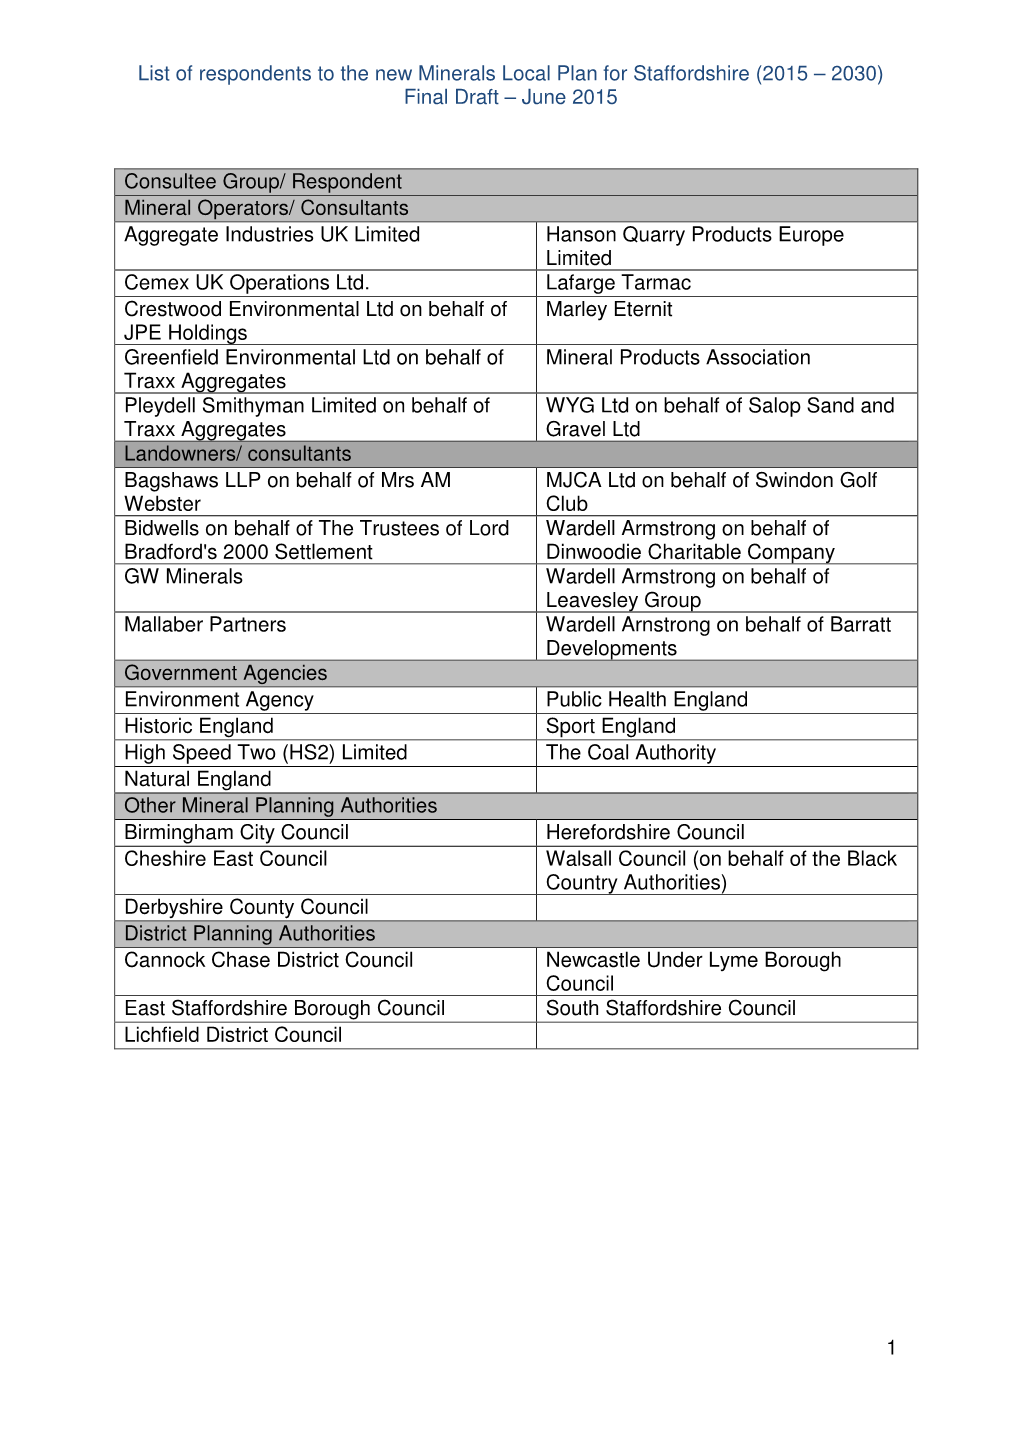 List of Respondents to the New Minerals Local Plan for Staffordshire (2015 – 2030) Final Draft – June 2015